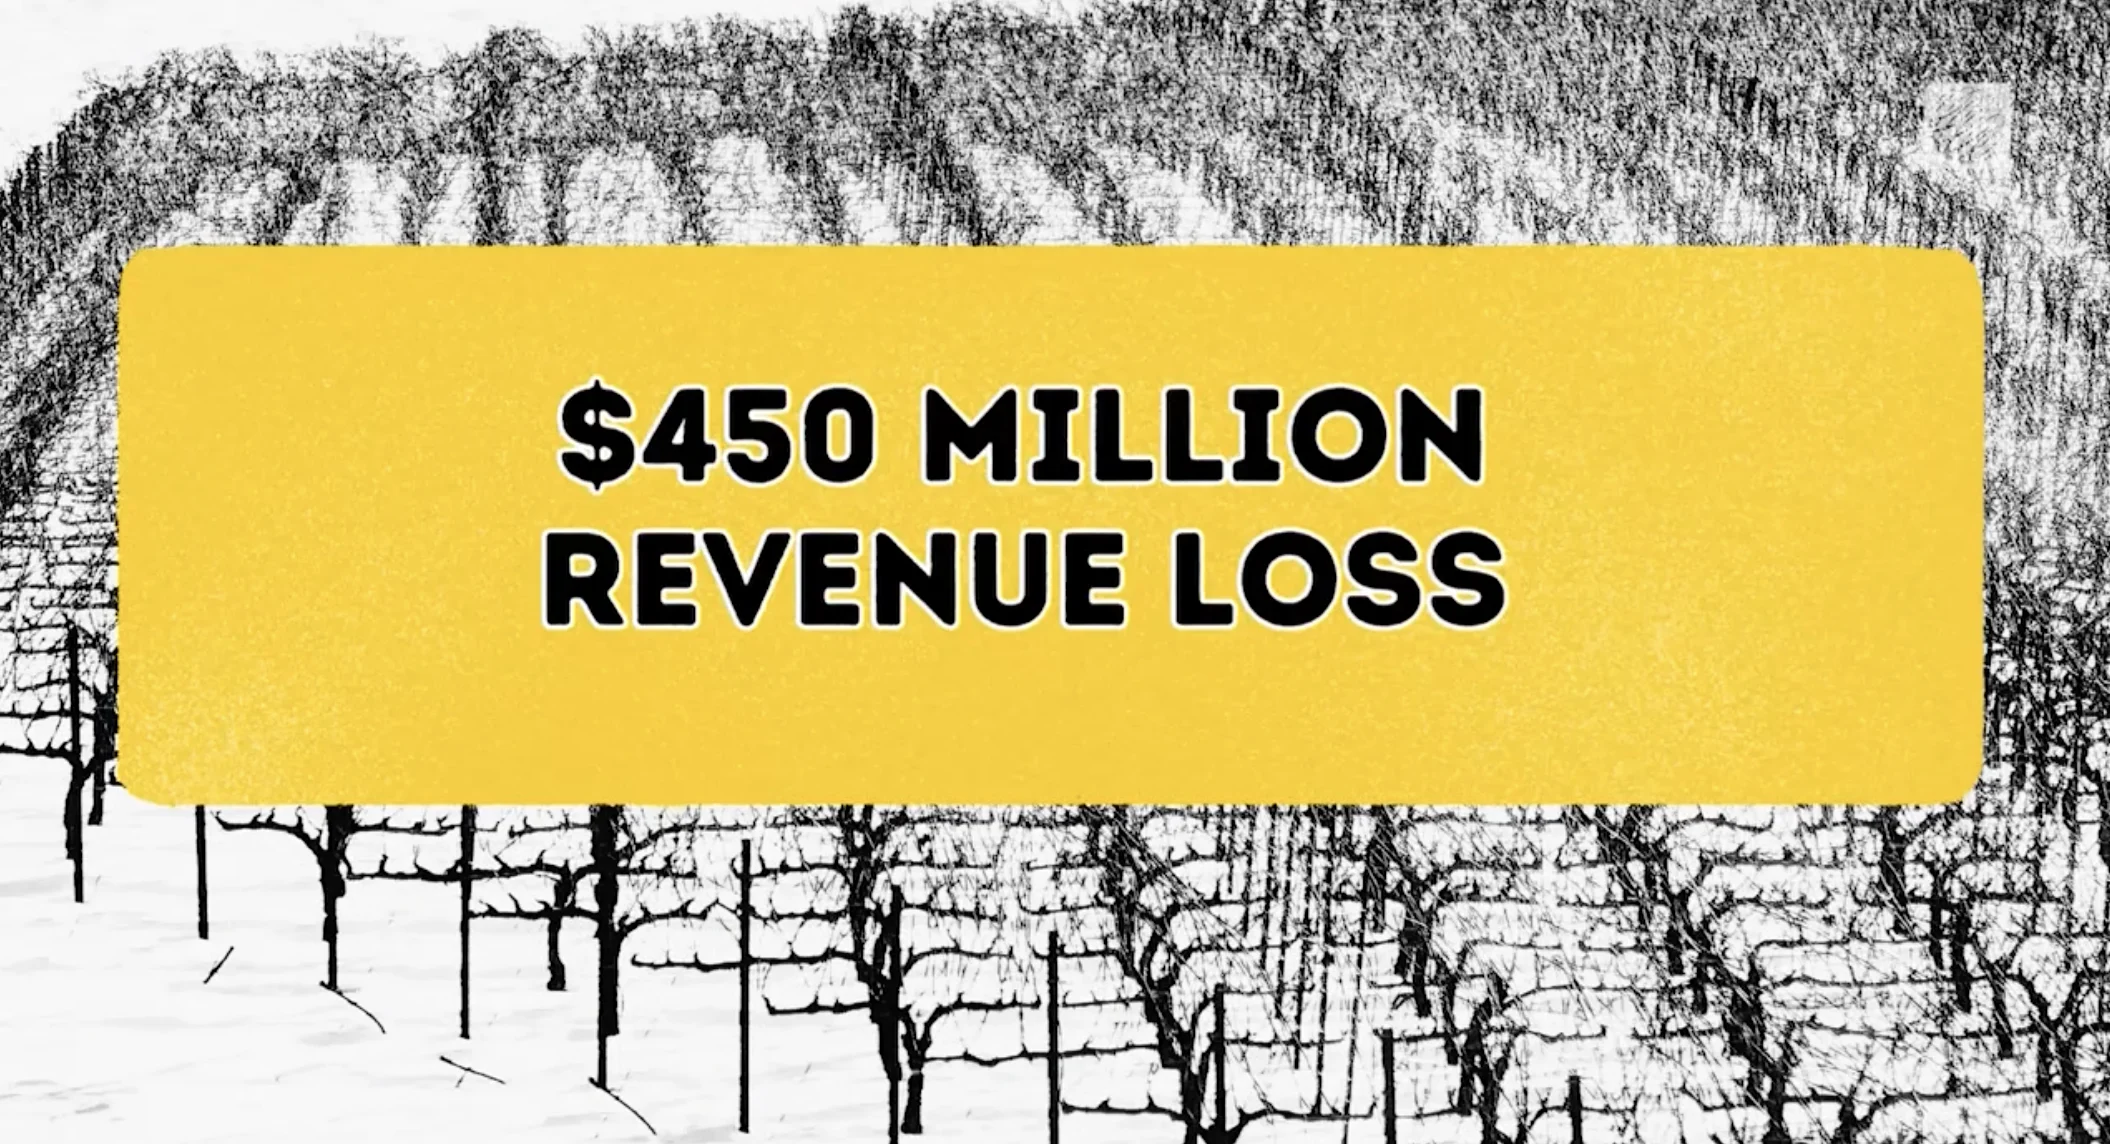 The B.C. wine industry estimates a loss of up to $445 million